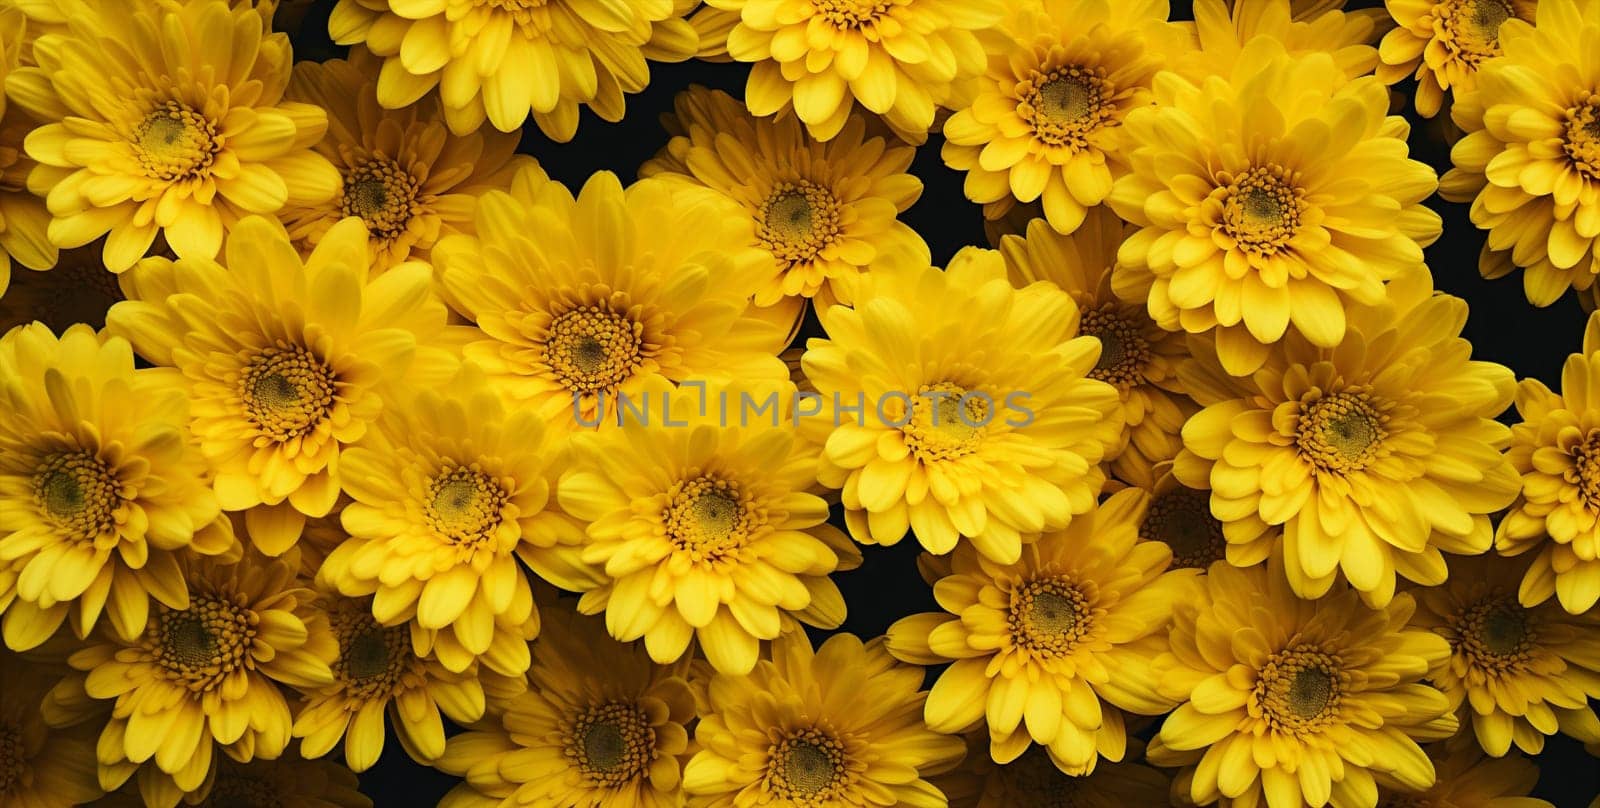 Chrysanthemum blossom beauty flower mockup botany close gardening plants yellow bright nature floral group bloom bouquet summer up background